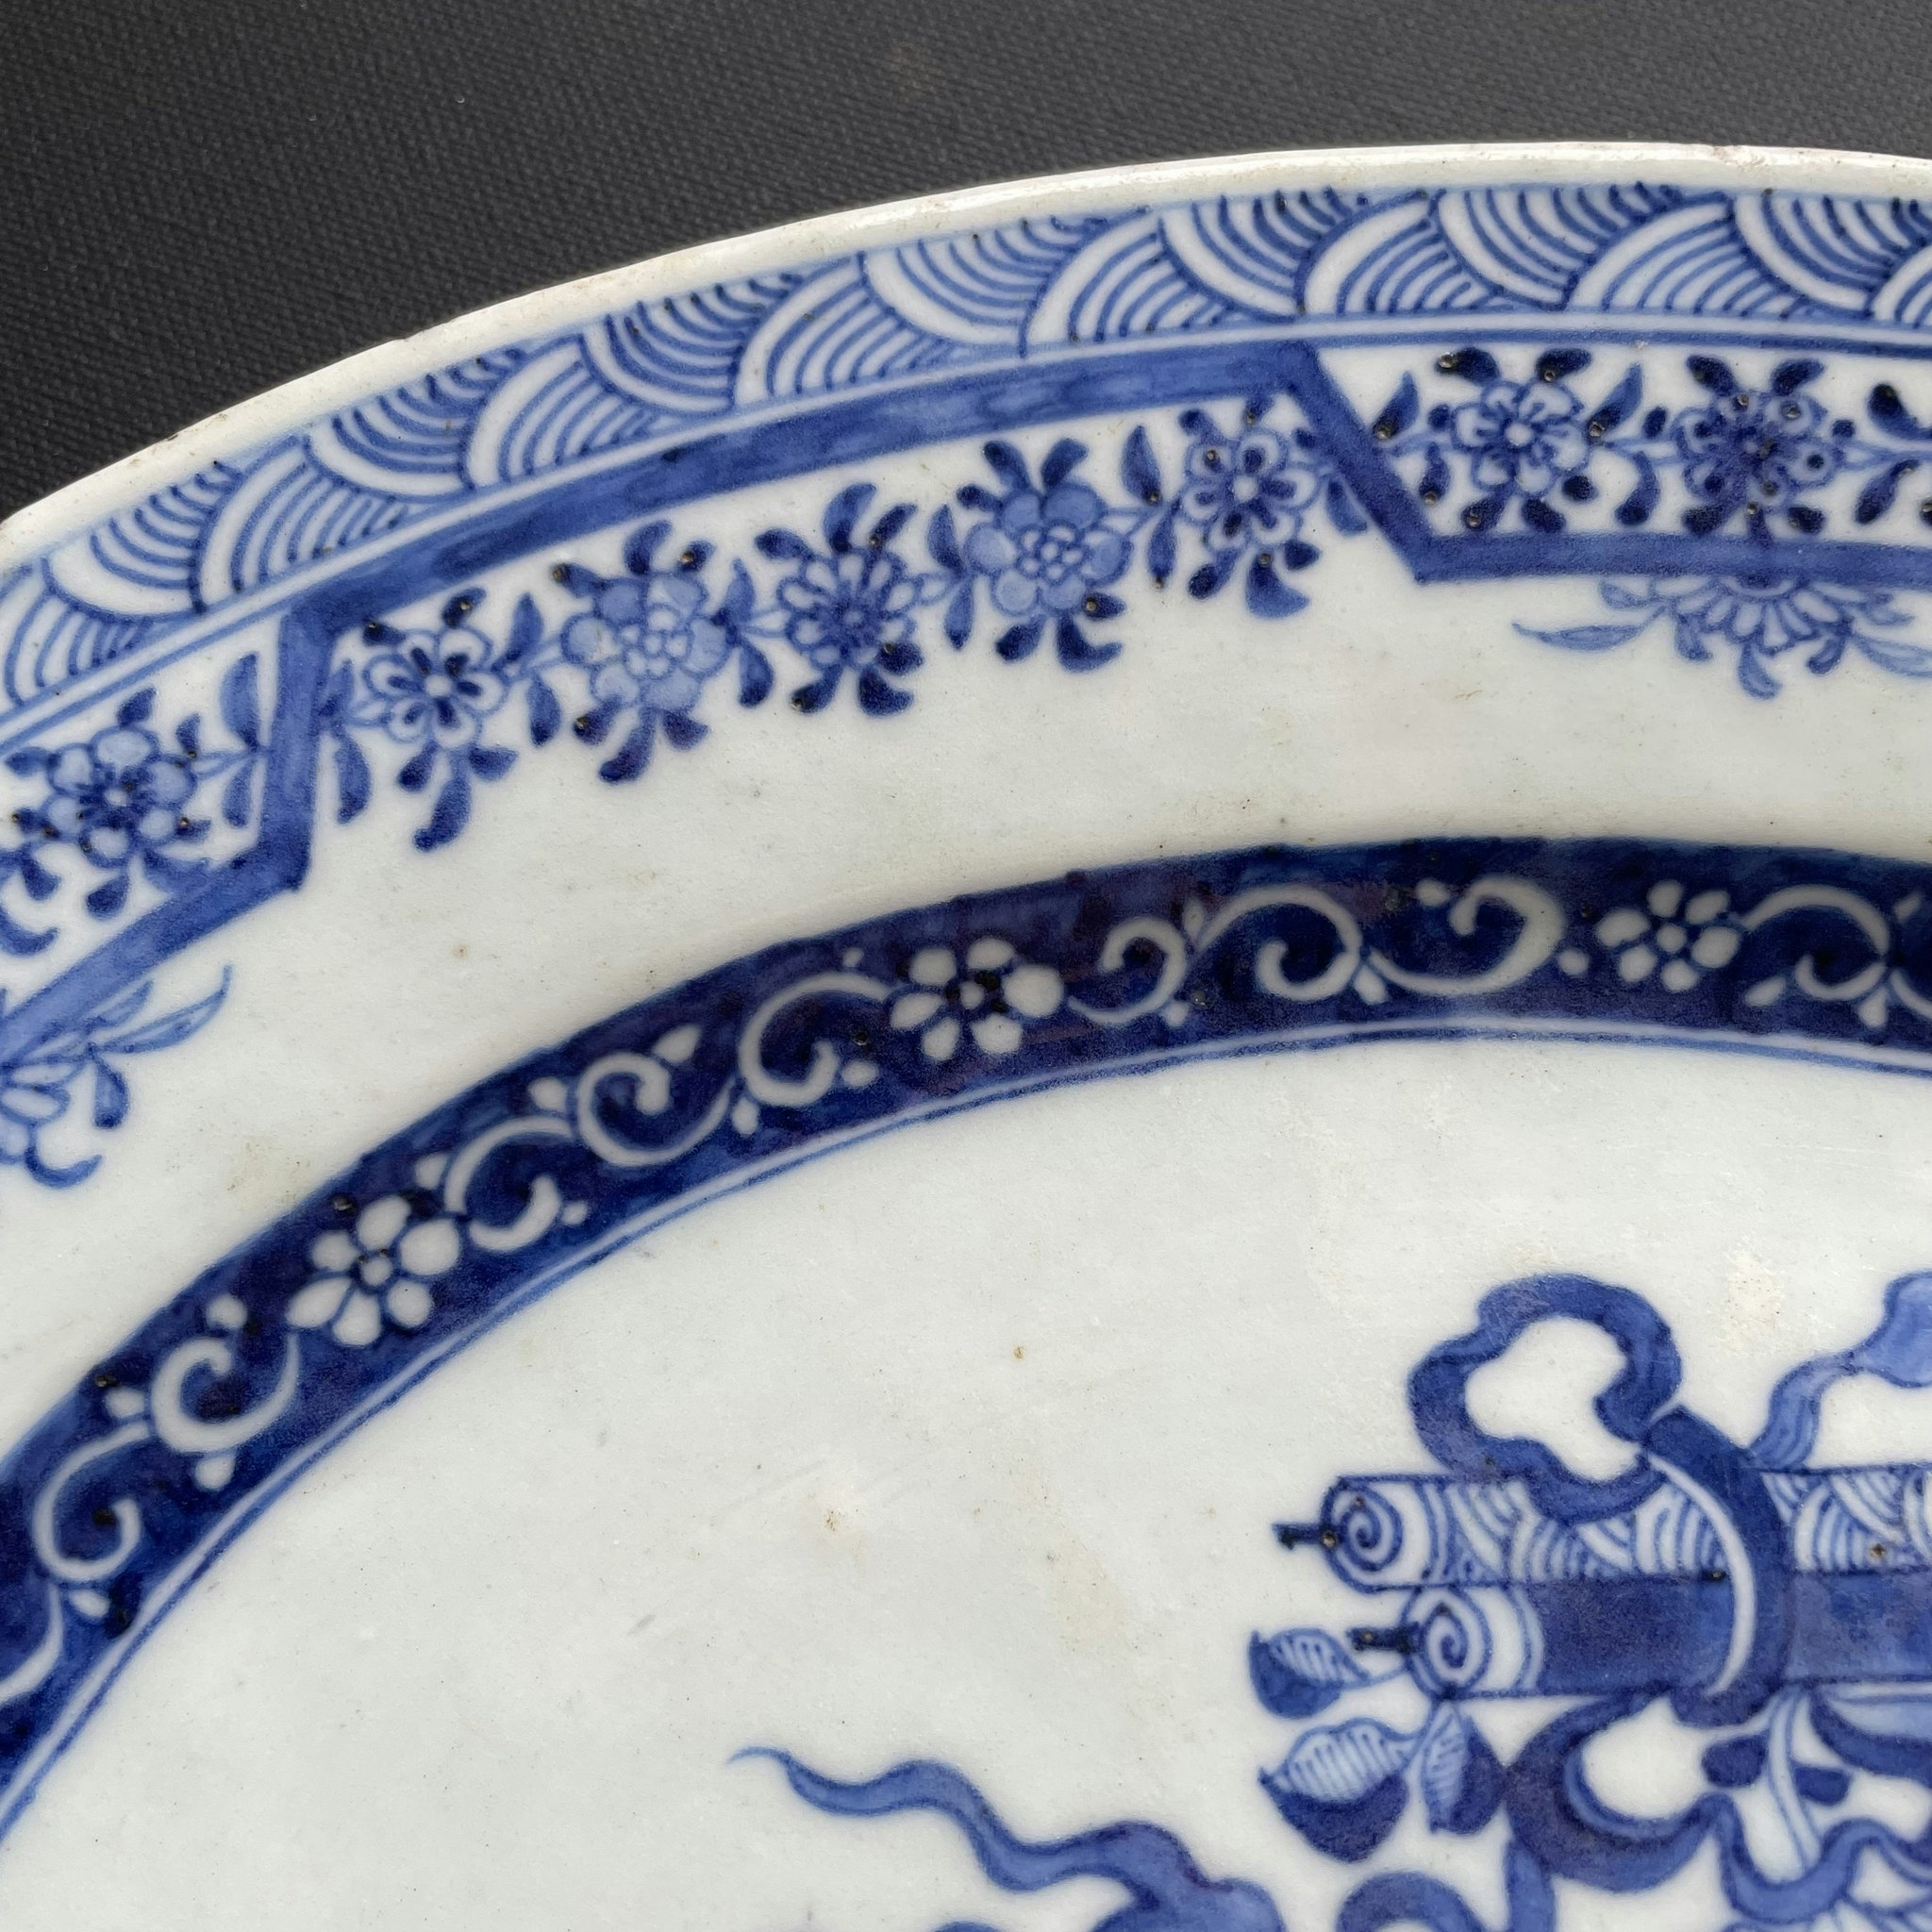 Chinese Antique Export Blue and White Porcelain platter, Qianlong period #1543